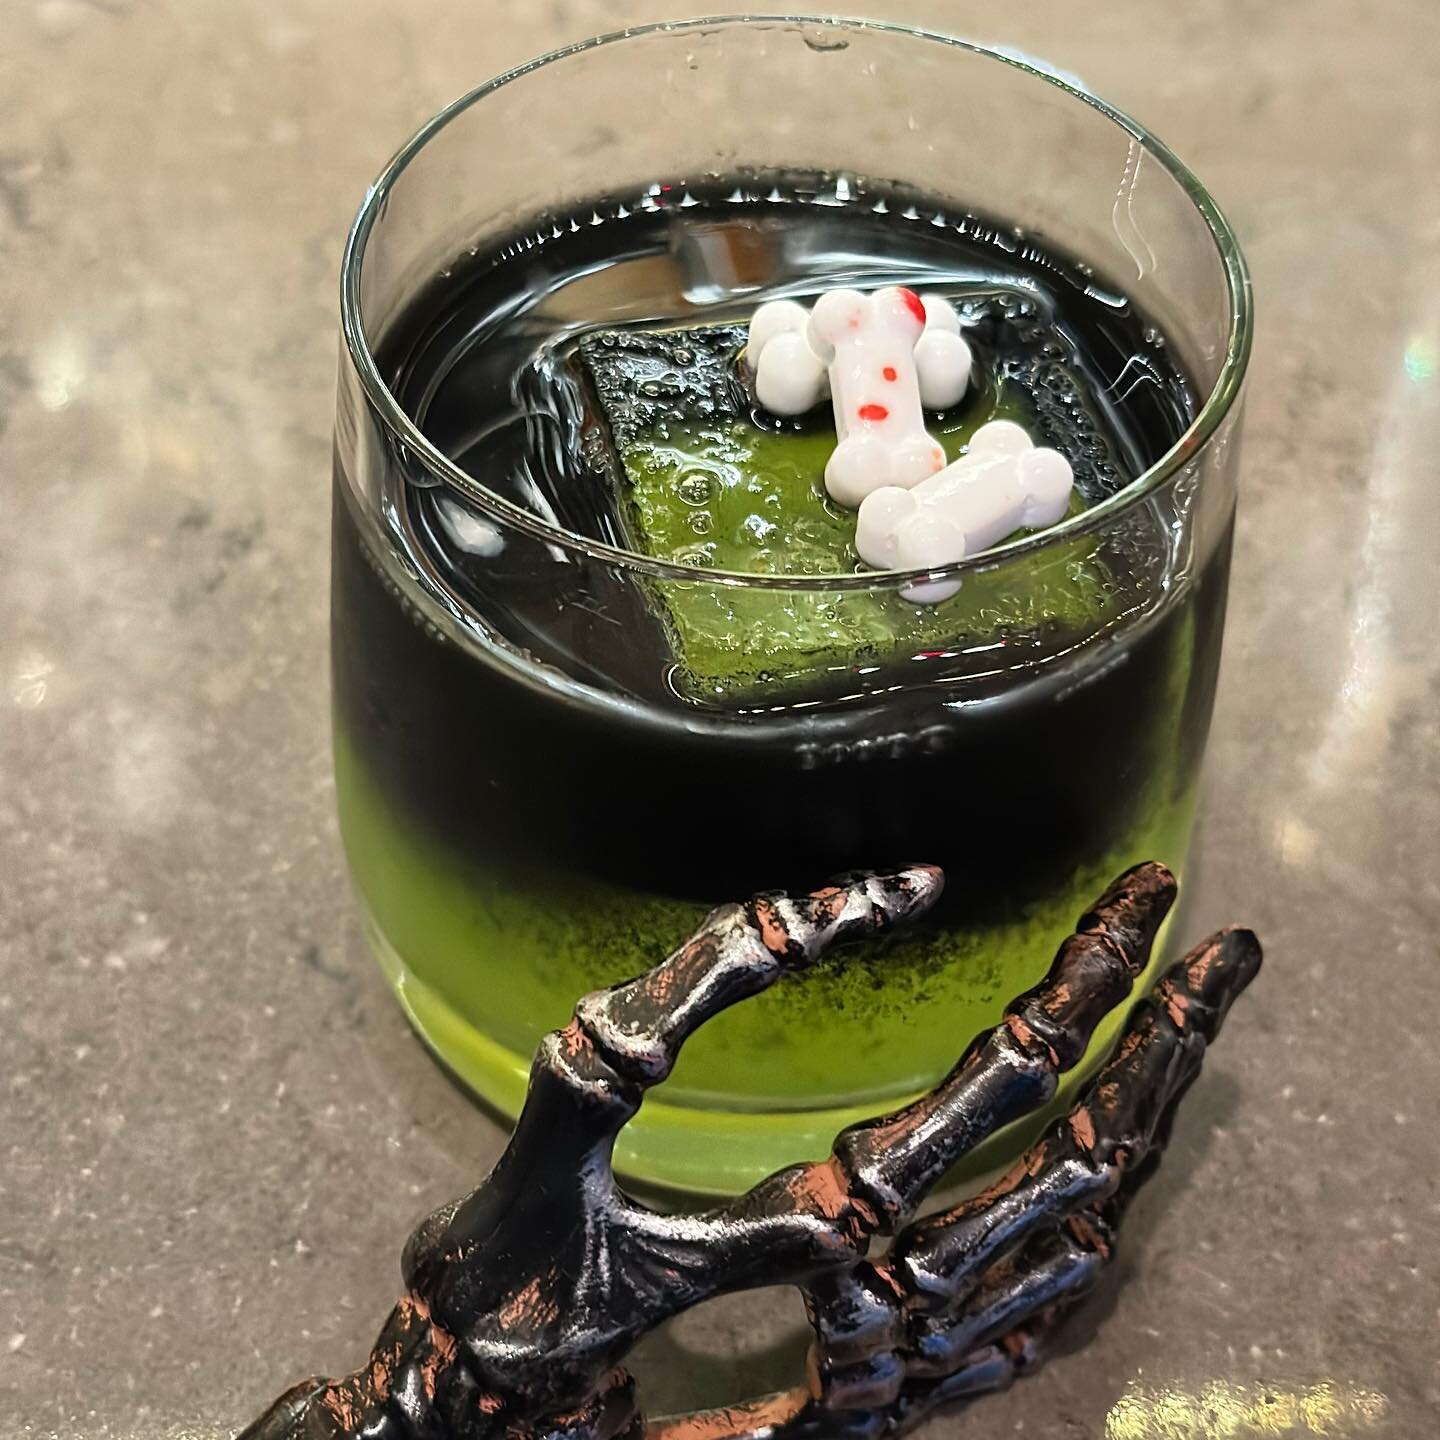 Happy Halloween from the SER team! Cheers to no tricks and all treats this #halloween 👻🎃🍬 Cheers! #halloweencocktails #ghoulishdrink